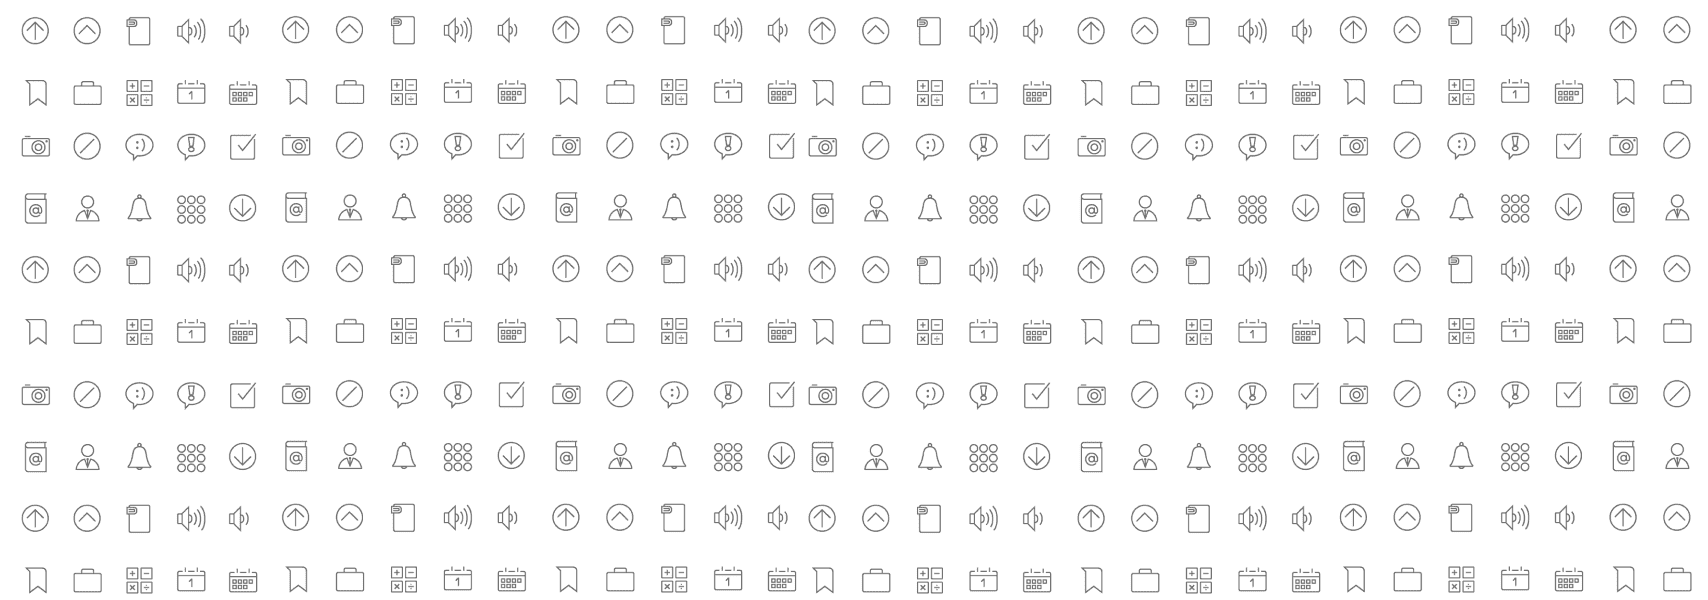 ios-close Vector Icons free download in SVG, PNG Format